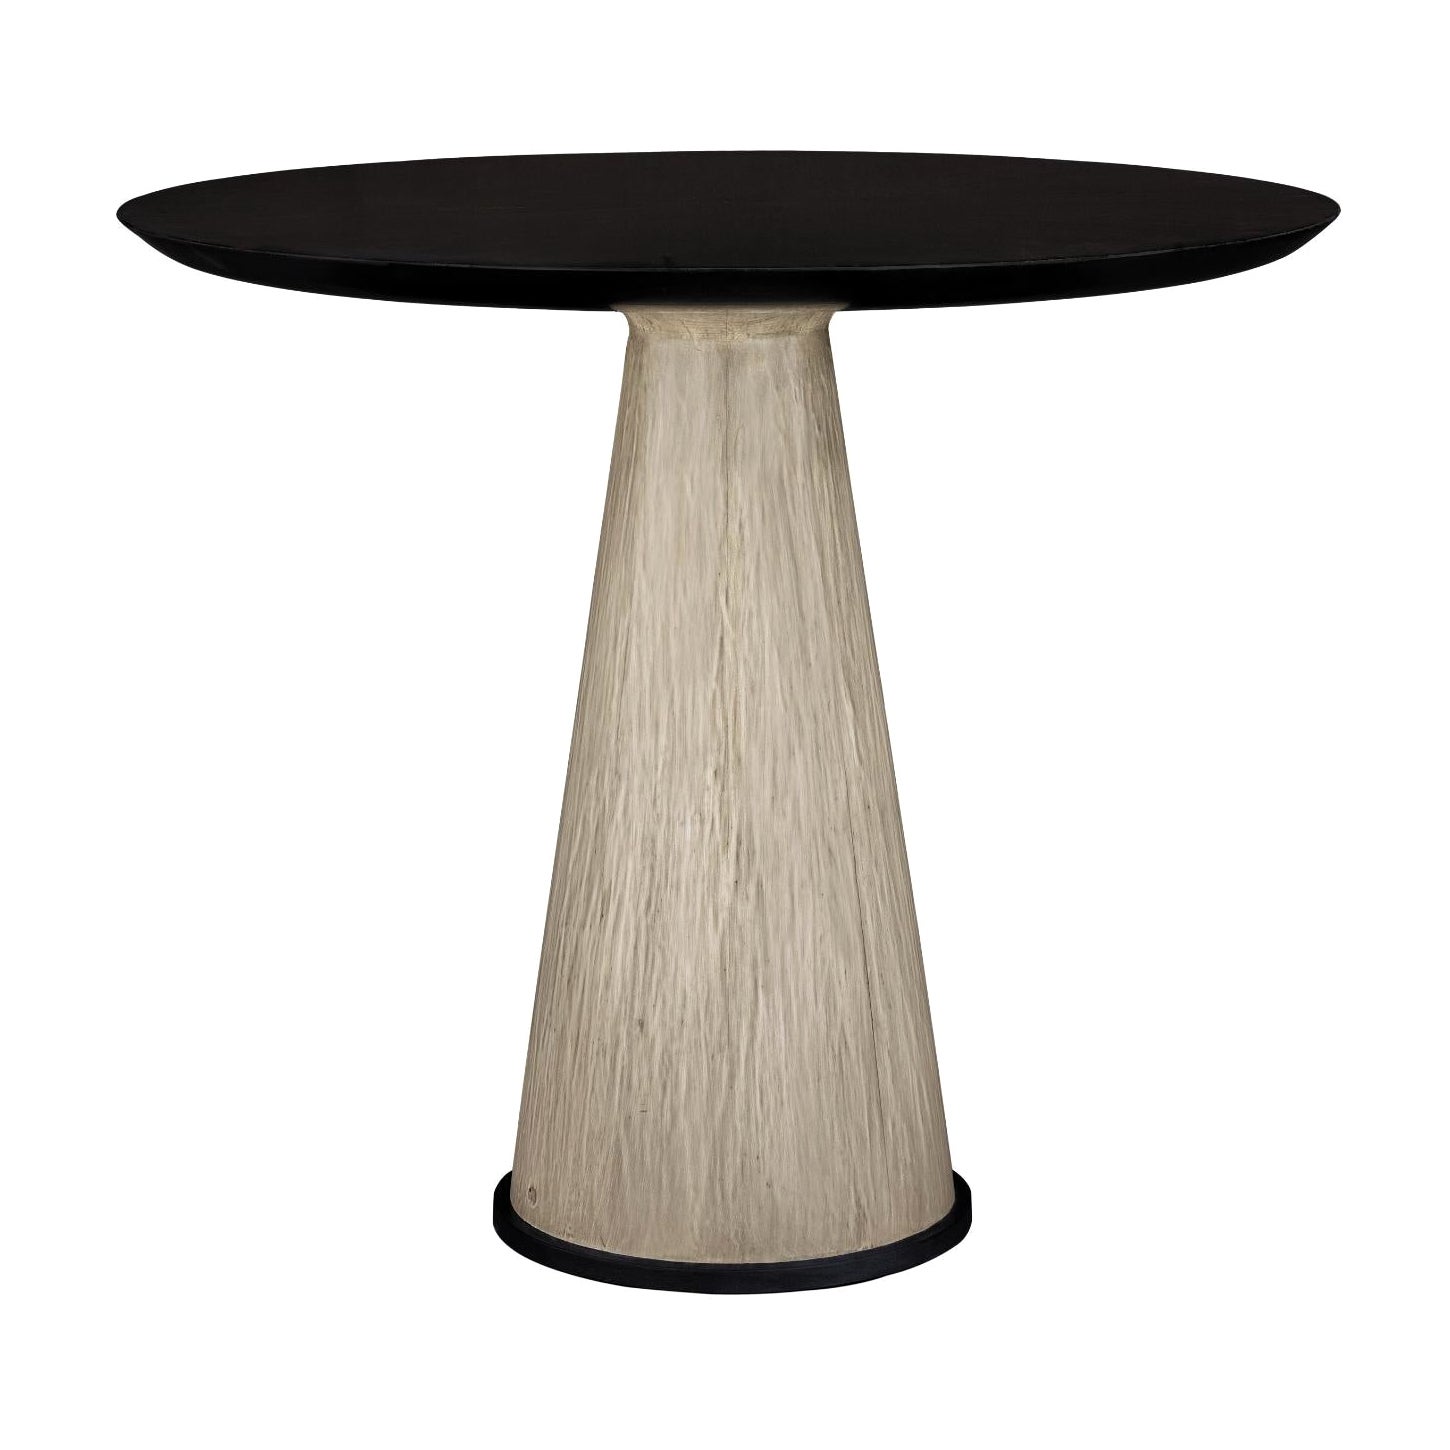 Wood Circular Occasional Dives Table with a Contrasting Conic Base